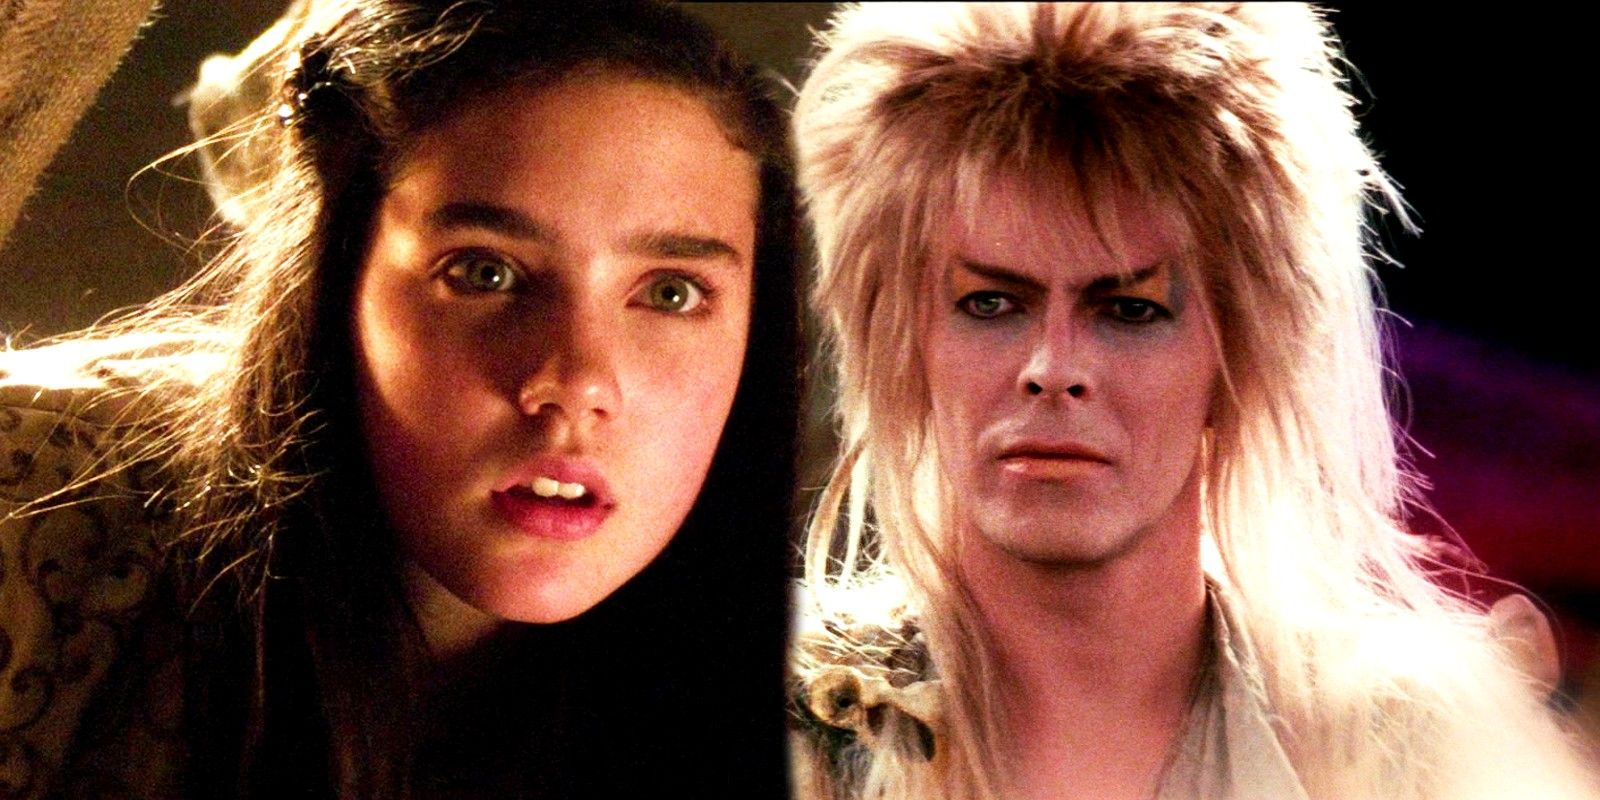 Custom image of a shocked Jennifer Connelly and David Bowie in Labyrinth